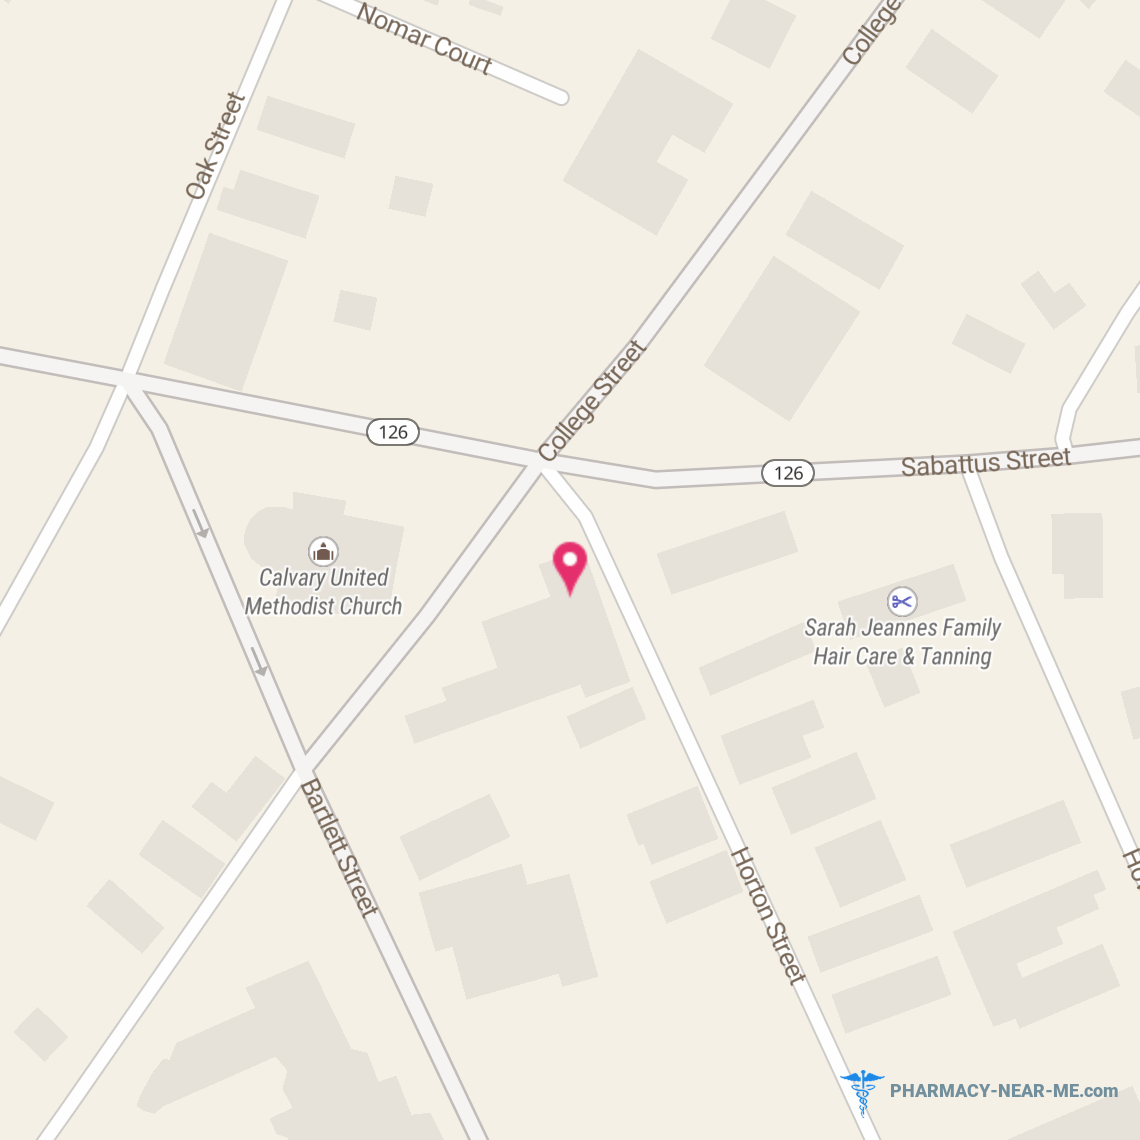 BEDARD DIRECT - Pharmacy Hours, Phone, Reviews & Information: 5 Horton Street, Lewiston, Maine 04240, United States